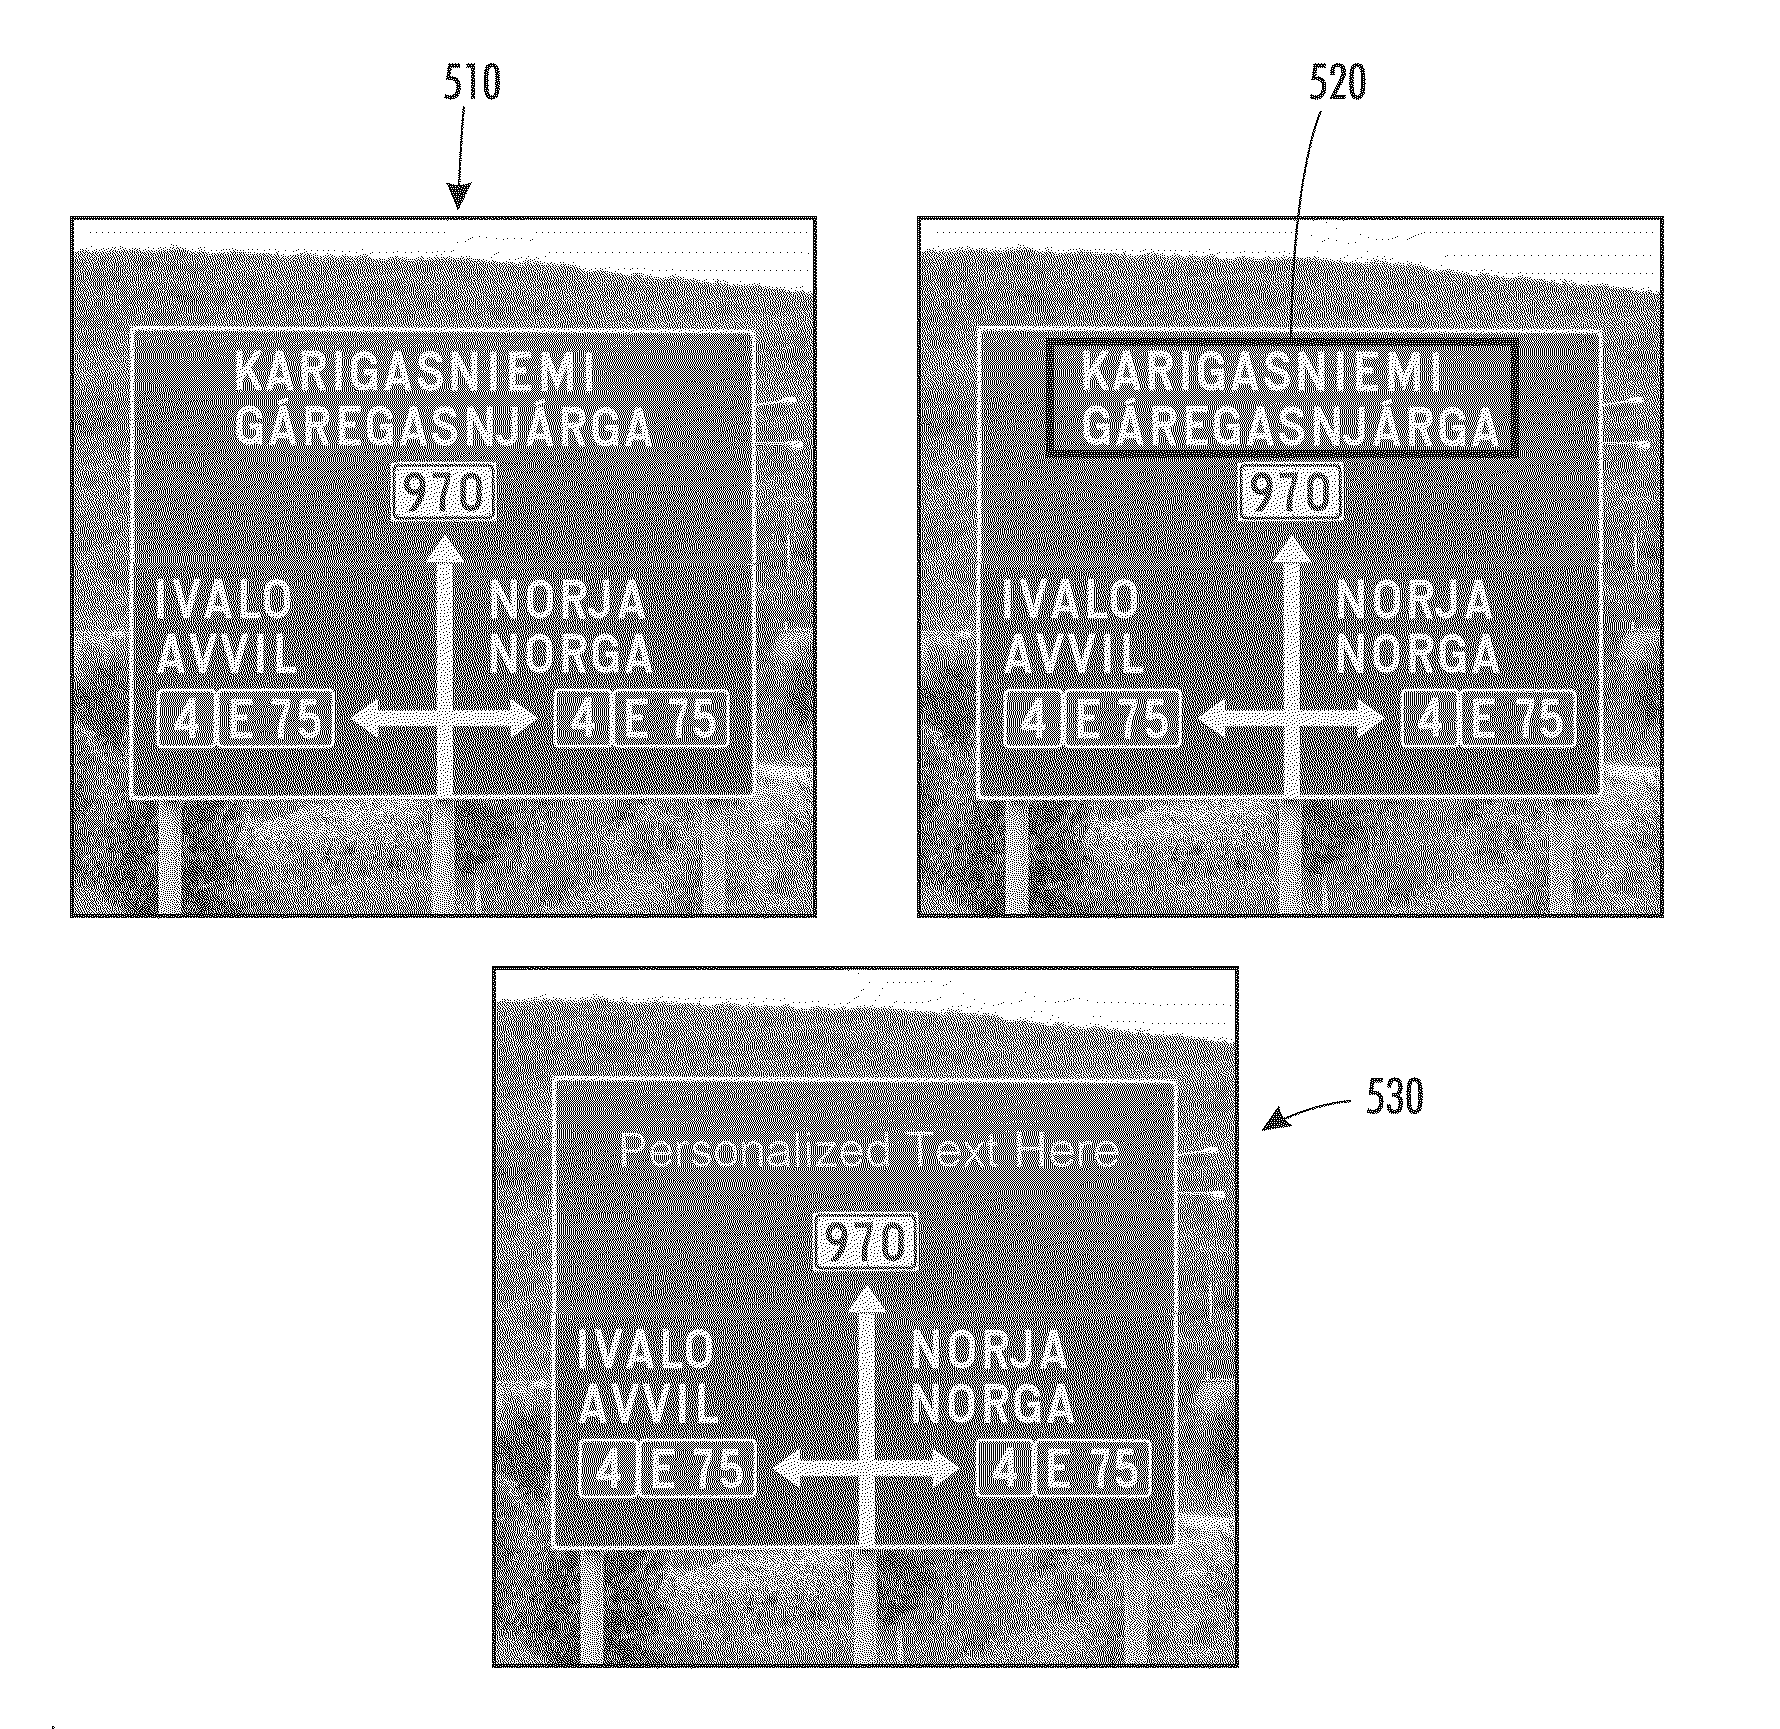 Systems and methods for text-based personalization of images